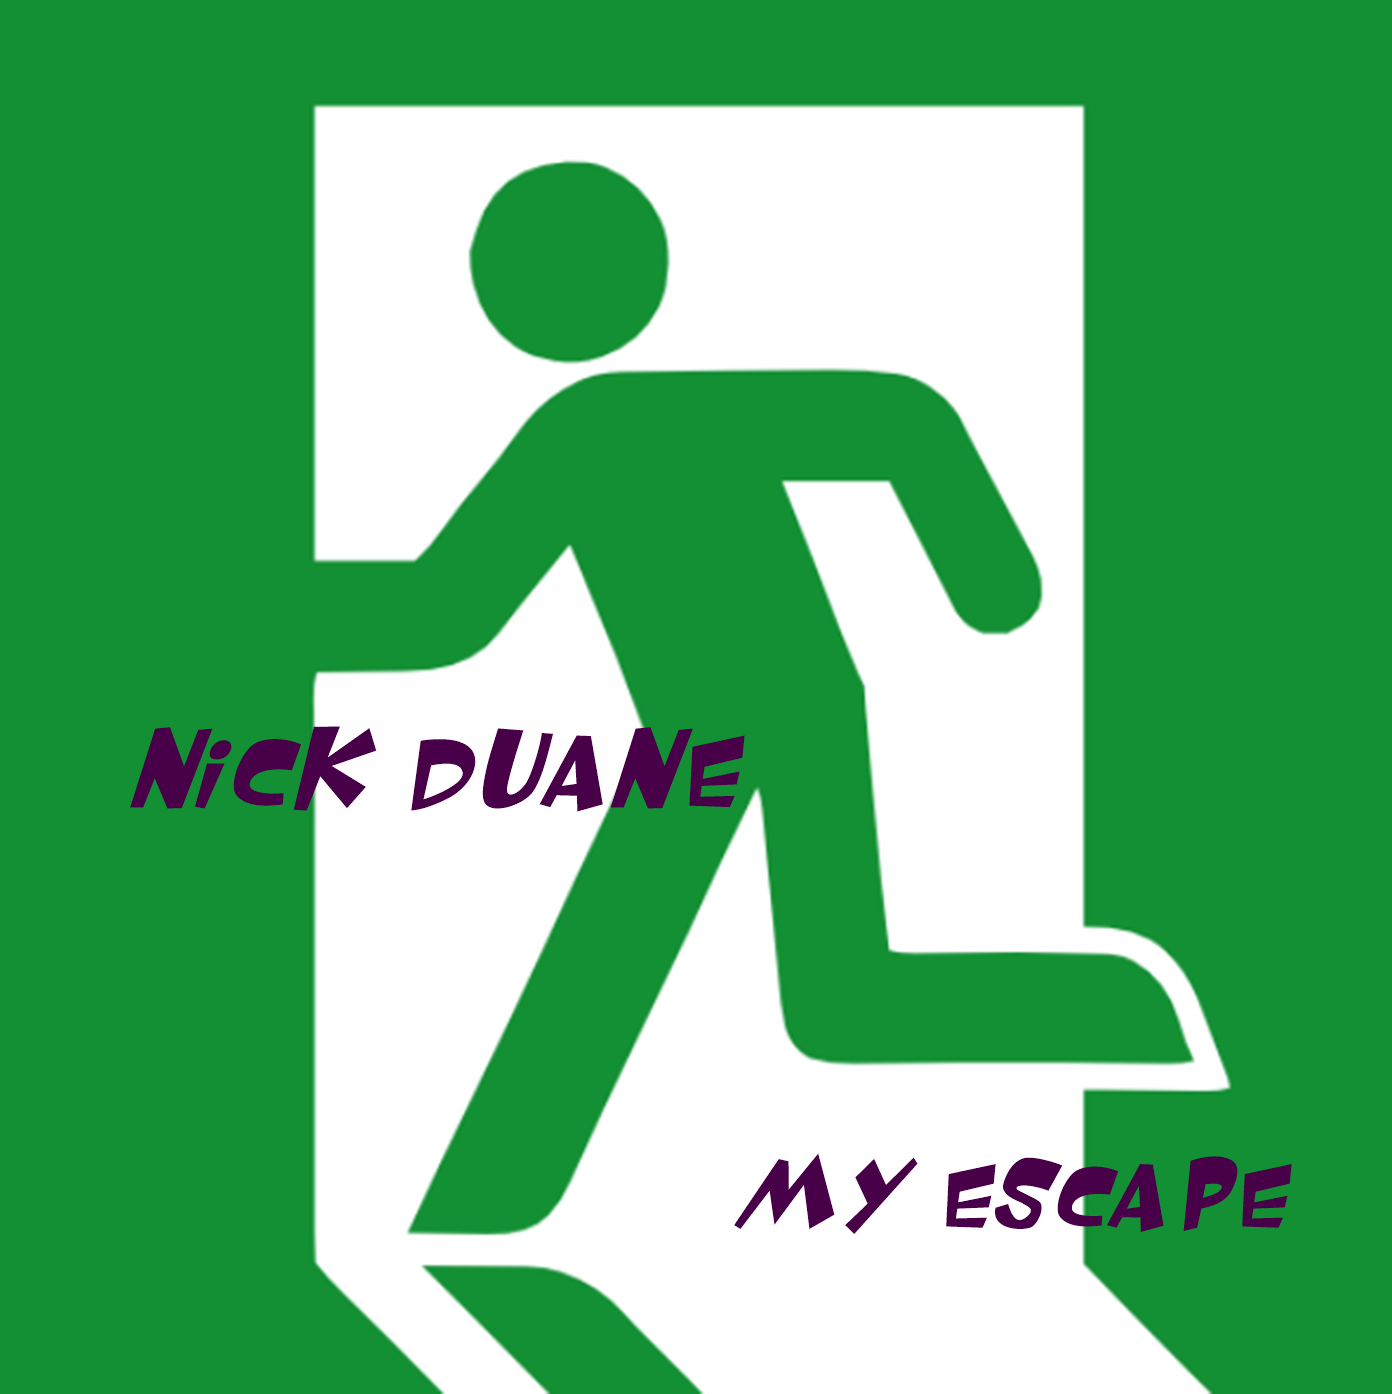 Singer and songwriter Nick Duane returns with new song ‘My Escape’